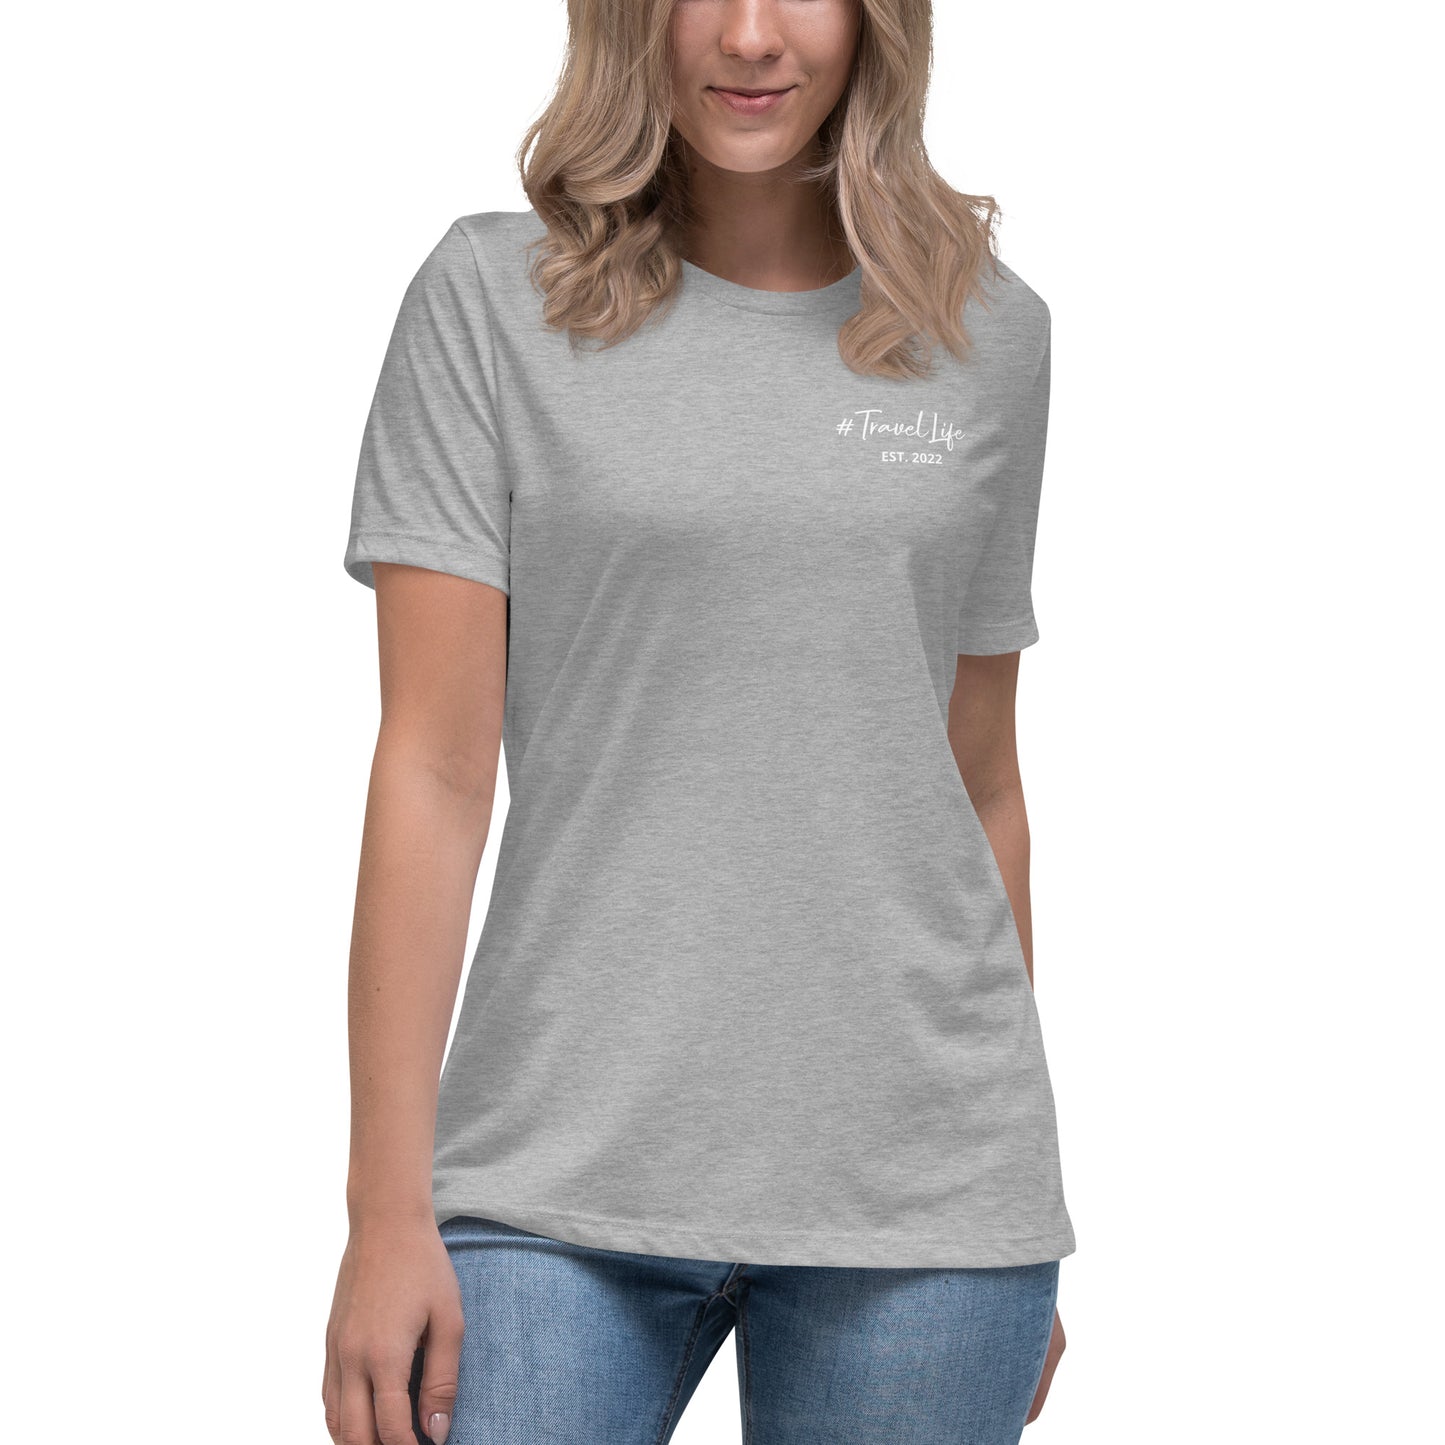 #Travellife Signature Est. 2022 Women's Relaxed T-Shirt White Text